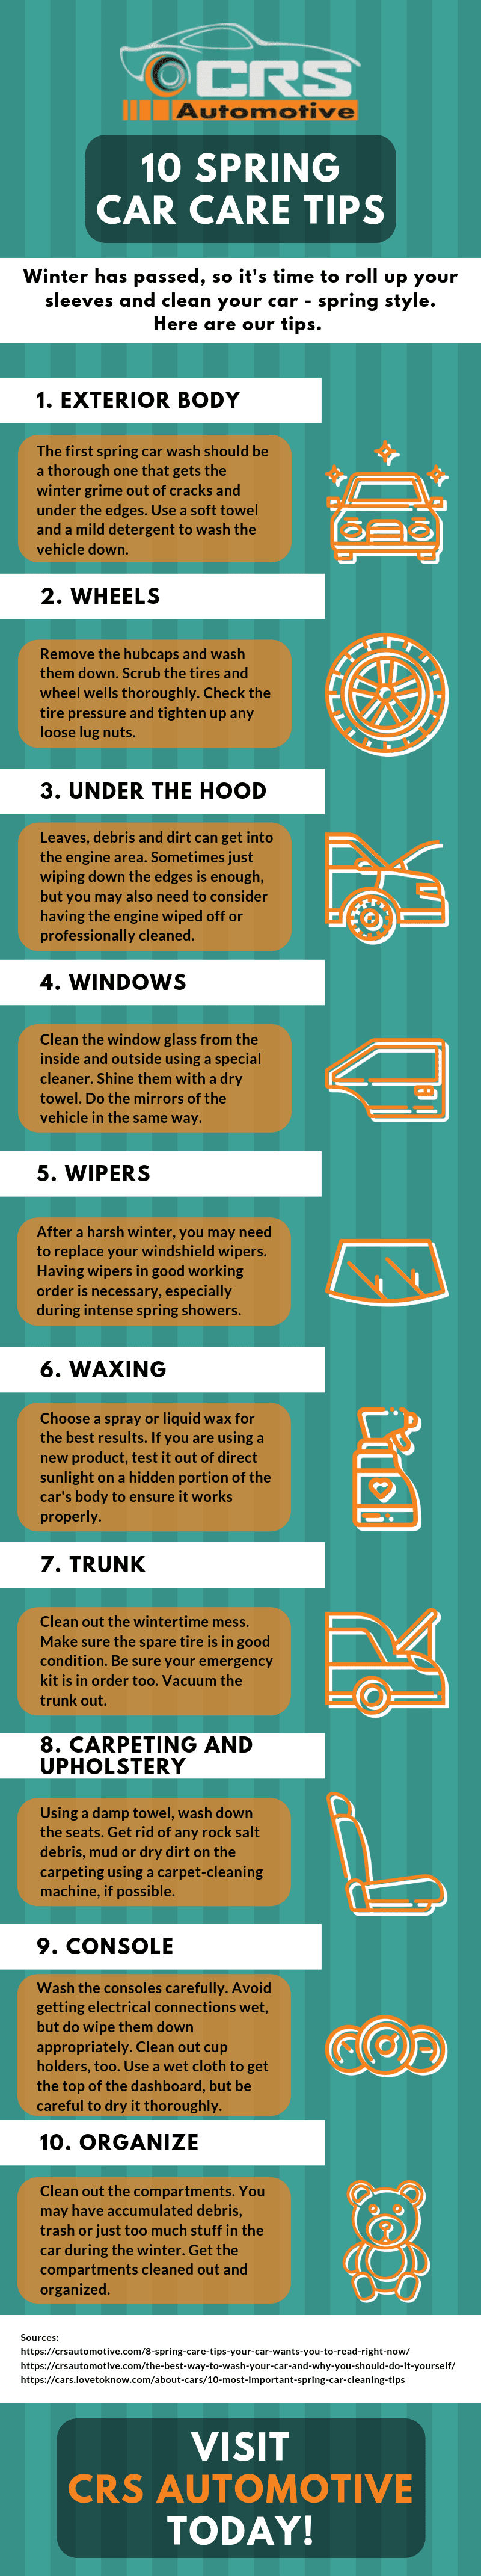 10 Spring Car Care Tips Infographic